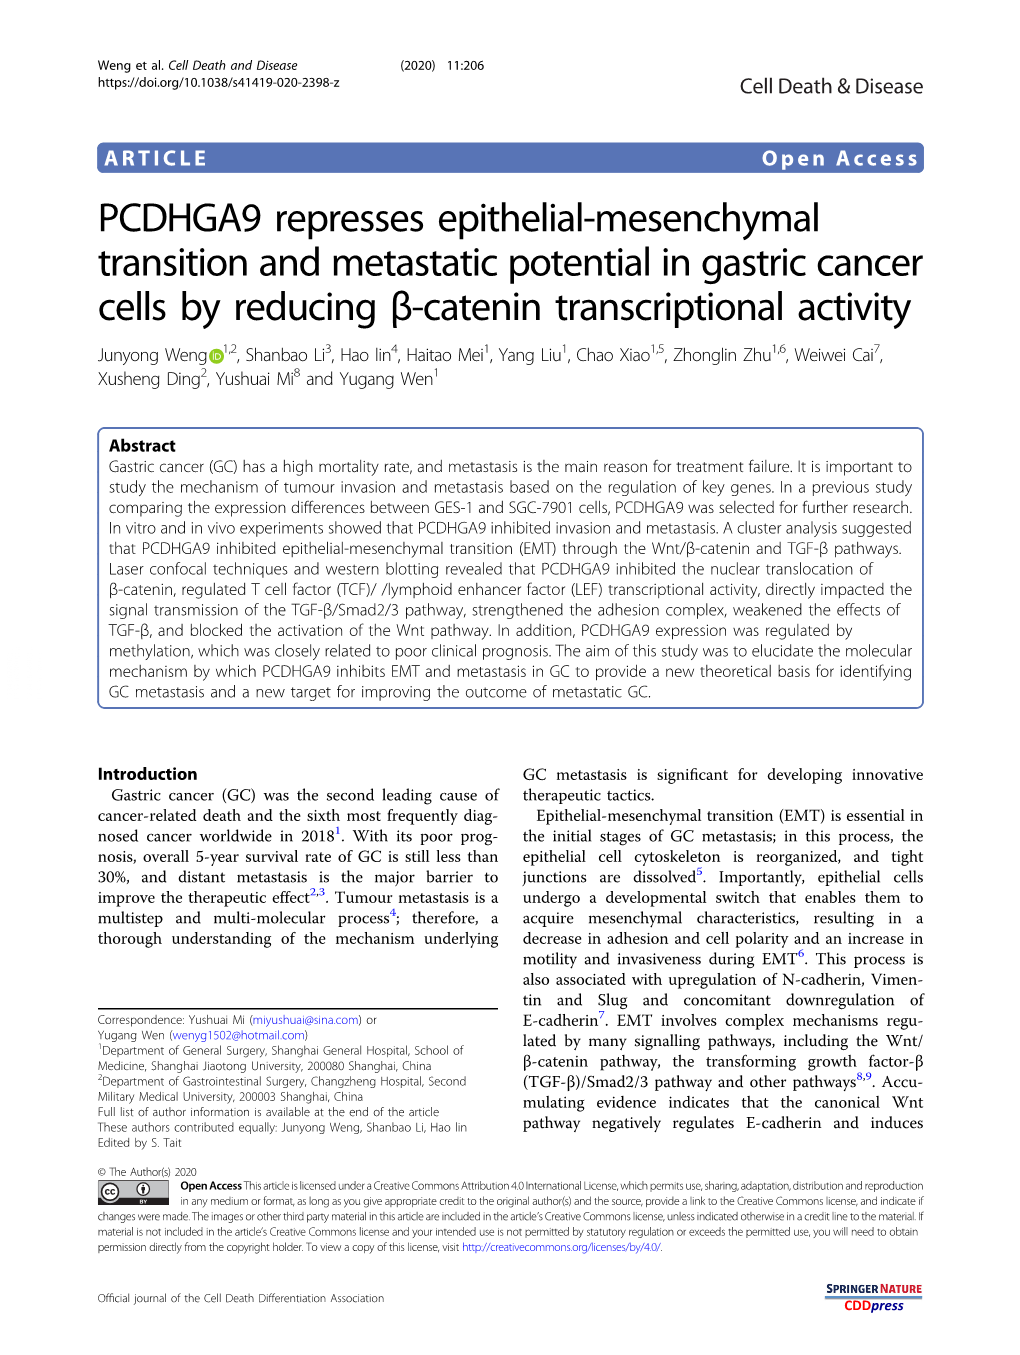 PCDHGA9 Represses Epithelial-Mesenchymal Transition and Metastatic Potential in Gastric Cancer Cells by Reducing Β-Catenin Tran